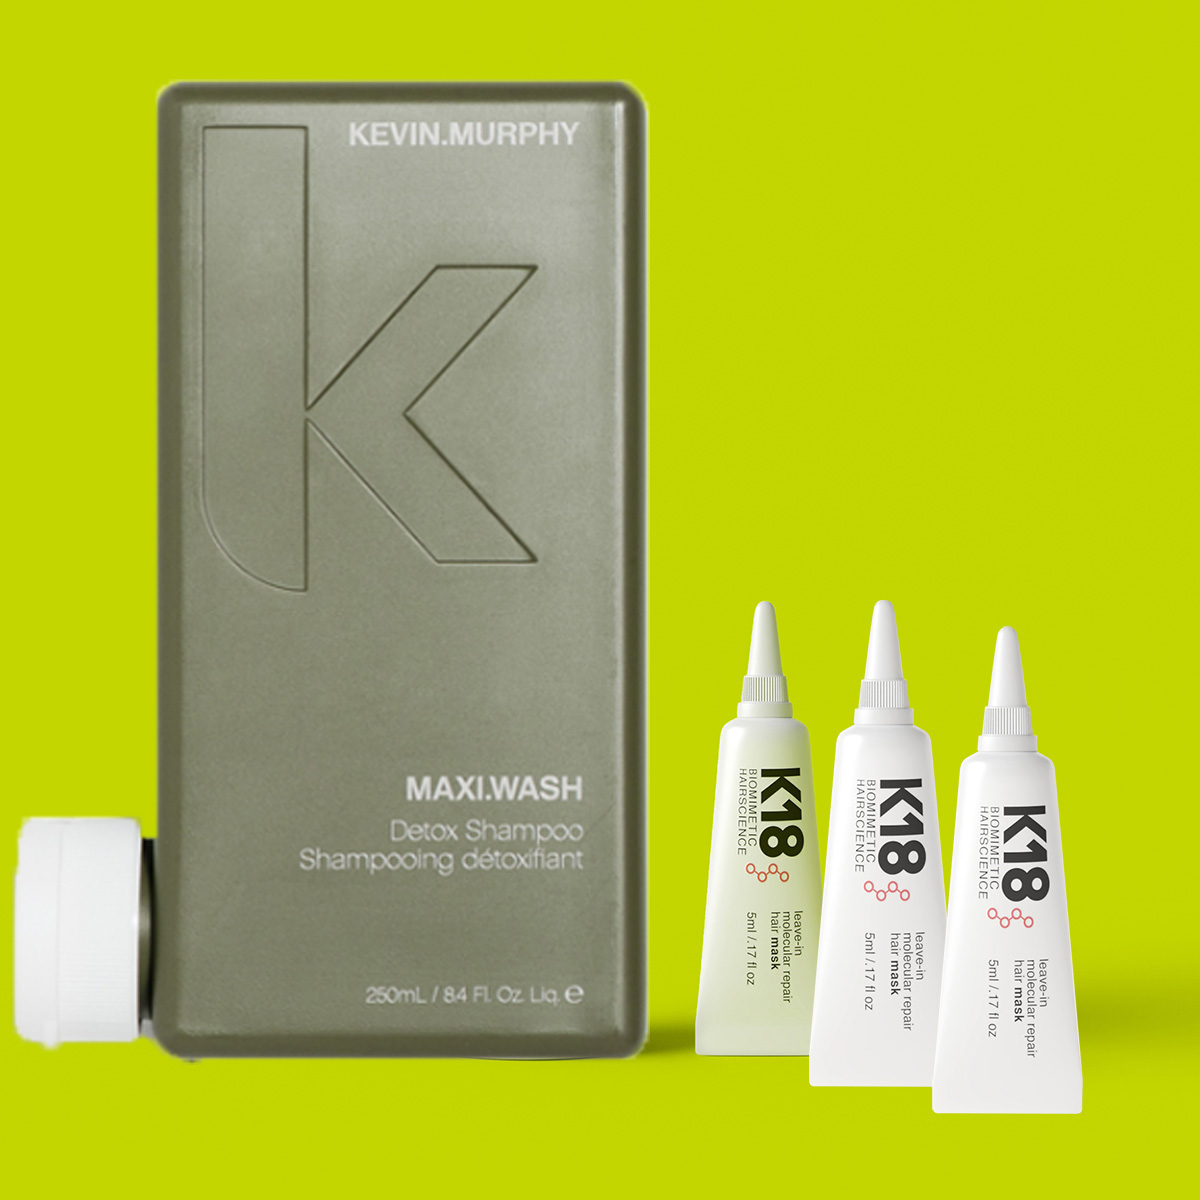 K18 Leave in Mask 3 x 5ml + Maxi Wash 250ml - Hairsale.se